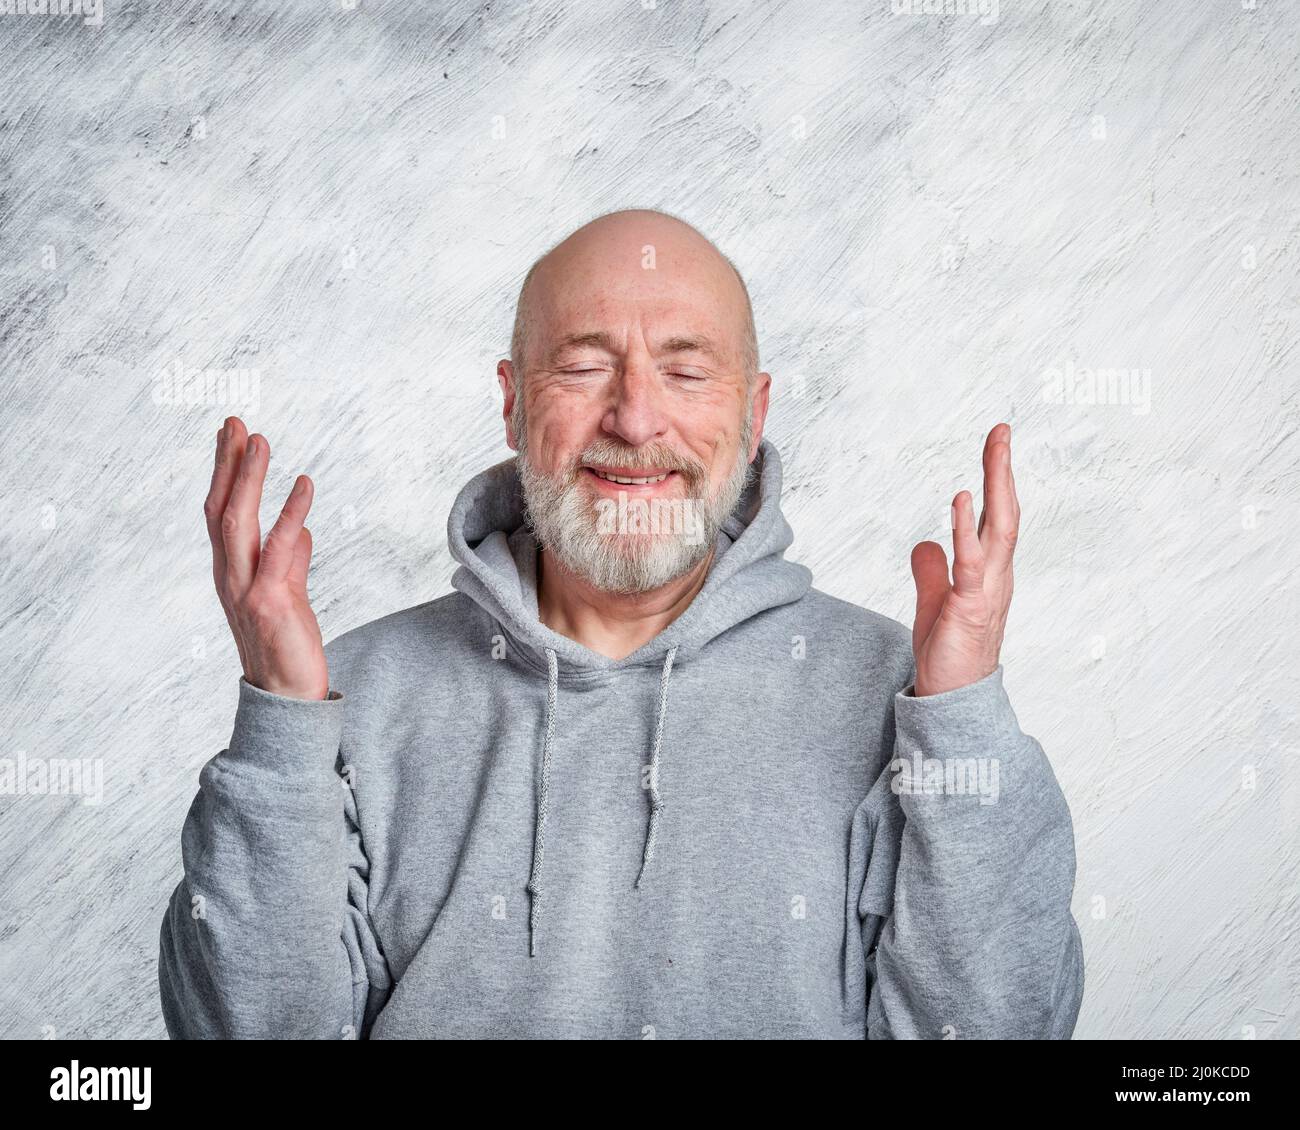 casual, portrait of happy and smiling gesticulating senior man wearing hooded sweatshirt Stock Photo